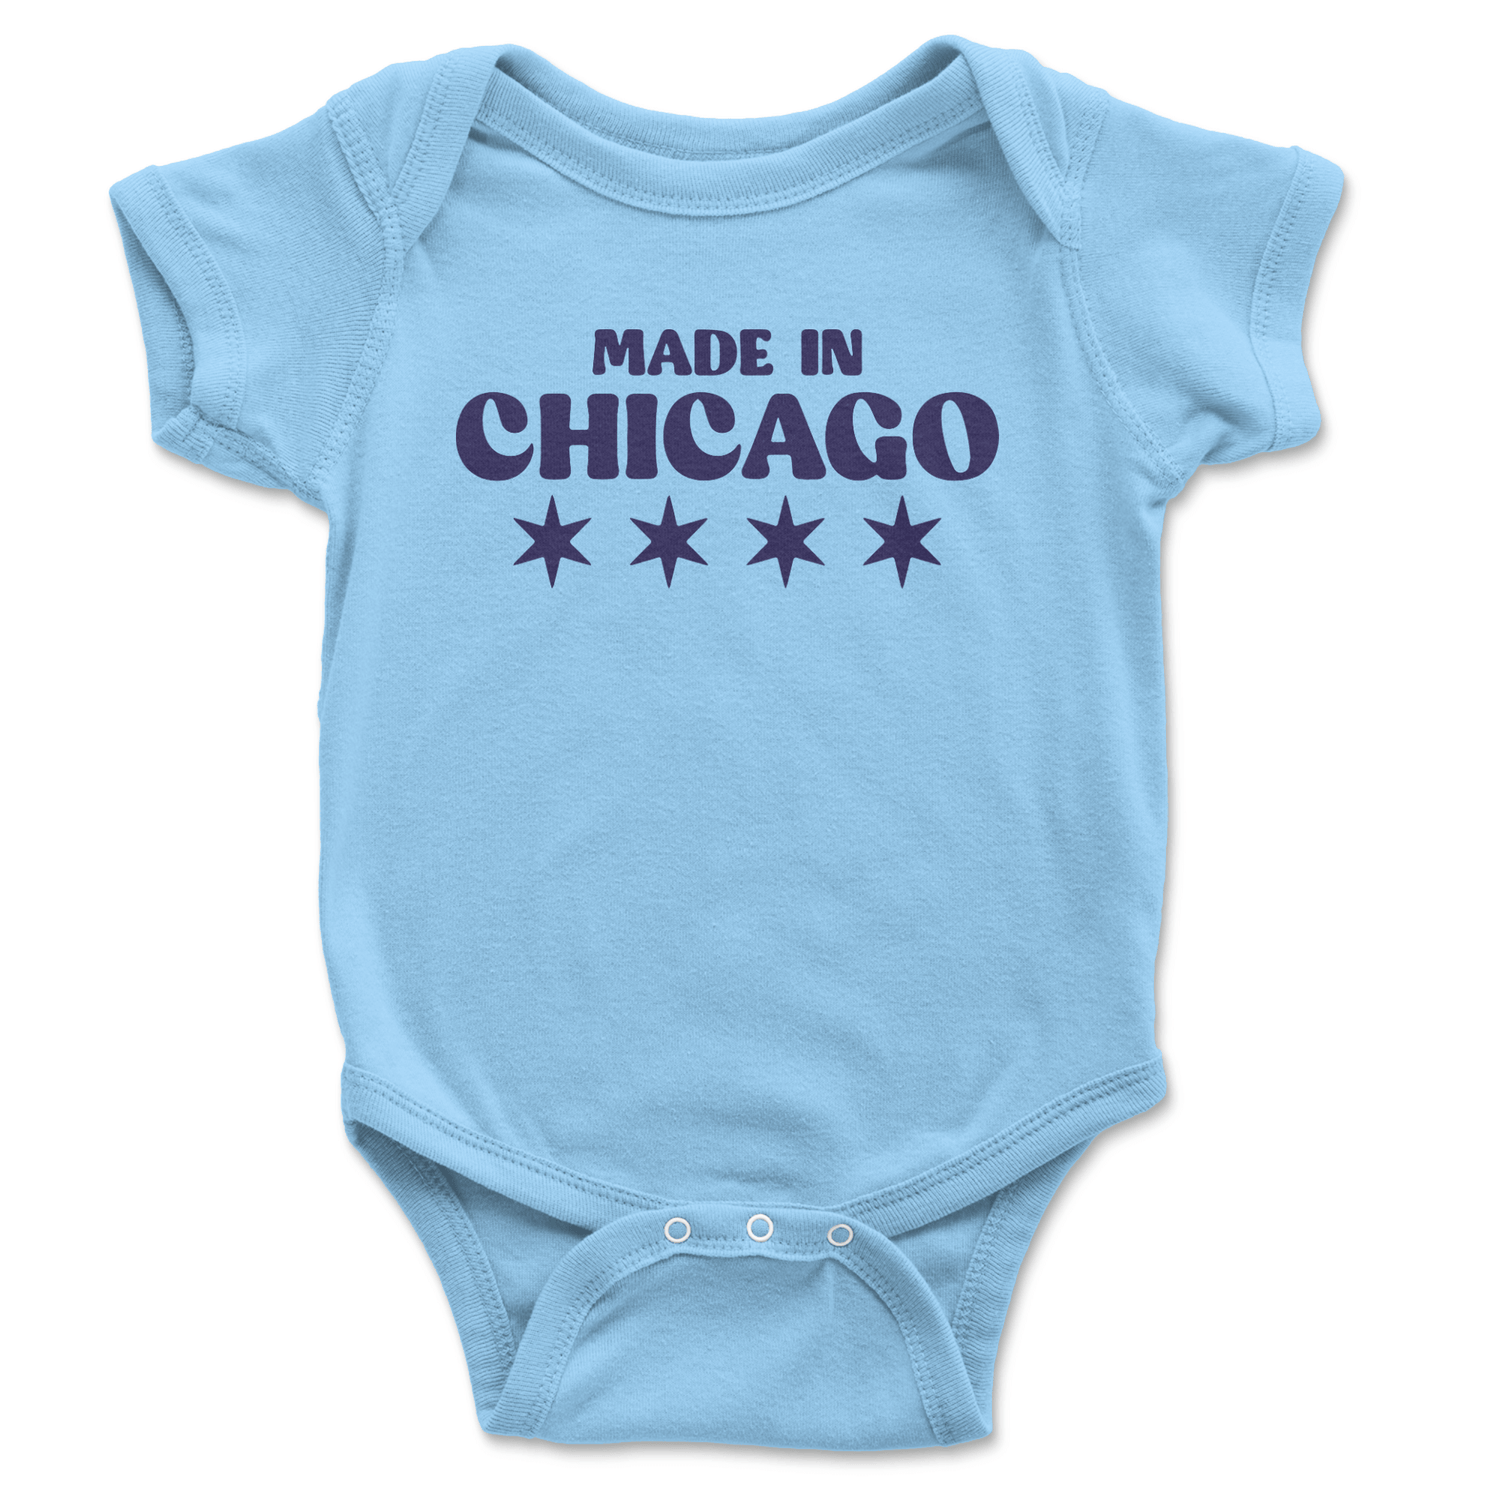 The T-Shirt Deli, Co. Made in Chicago Onesie